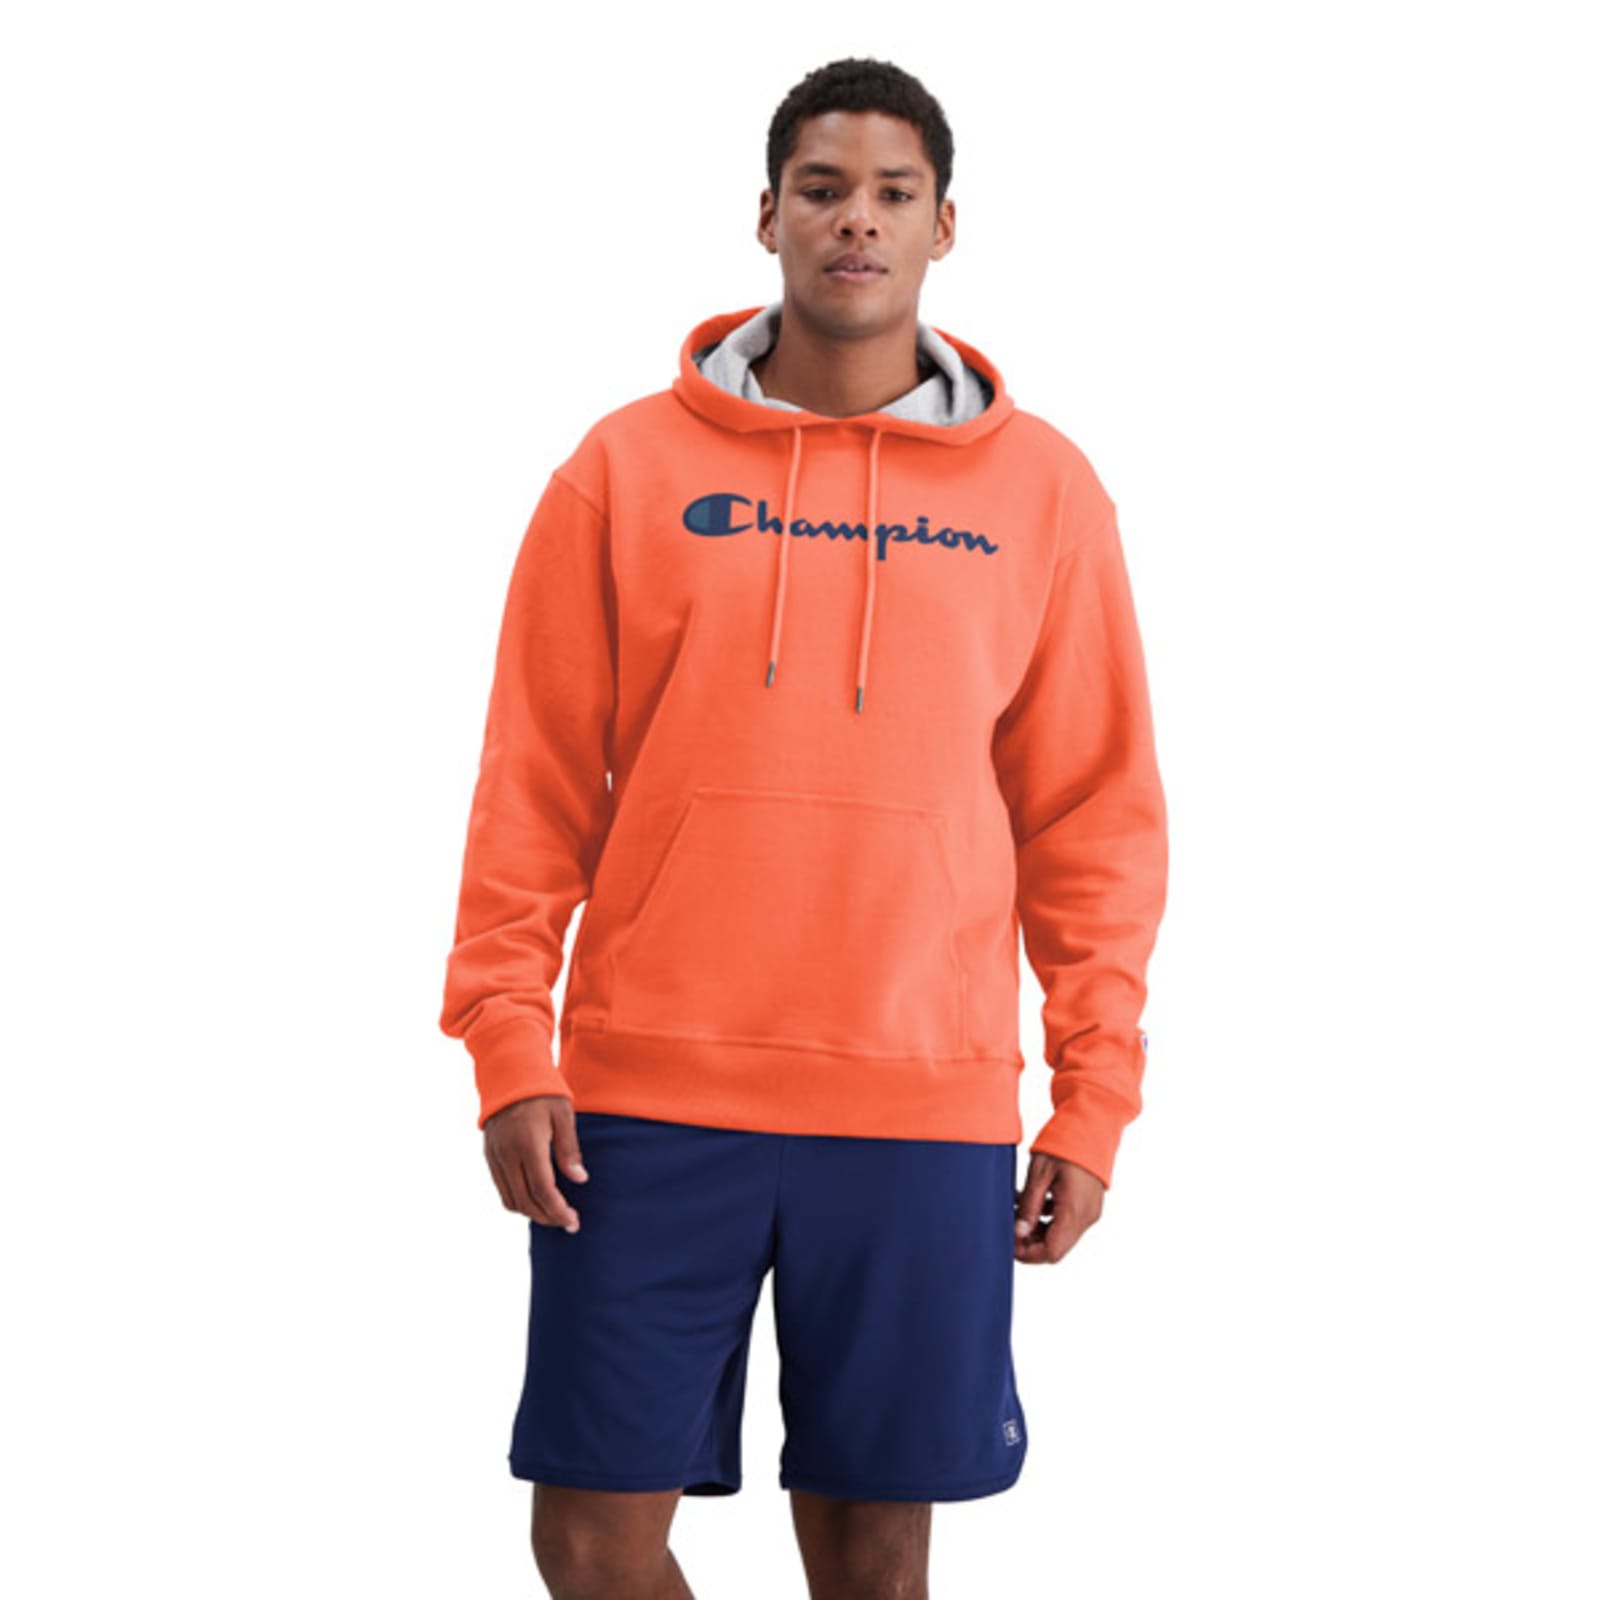 Champion Men's Powerblend Poppy Orange Graphic Long Sleeve Dual Blend Hoodie by Champion at Farm